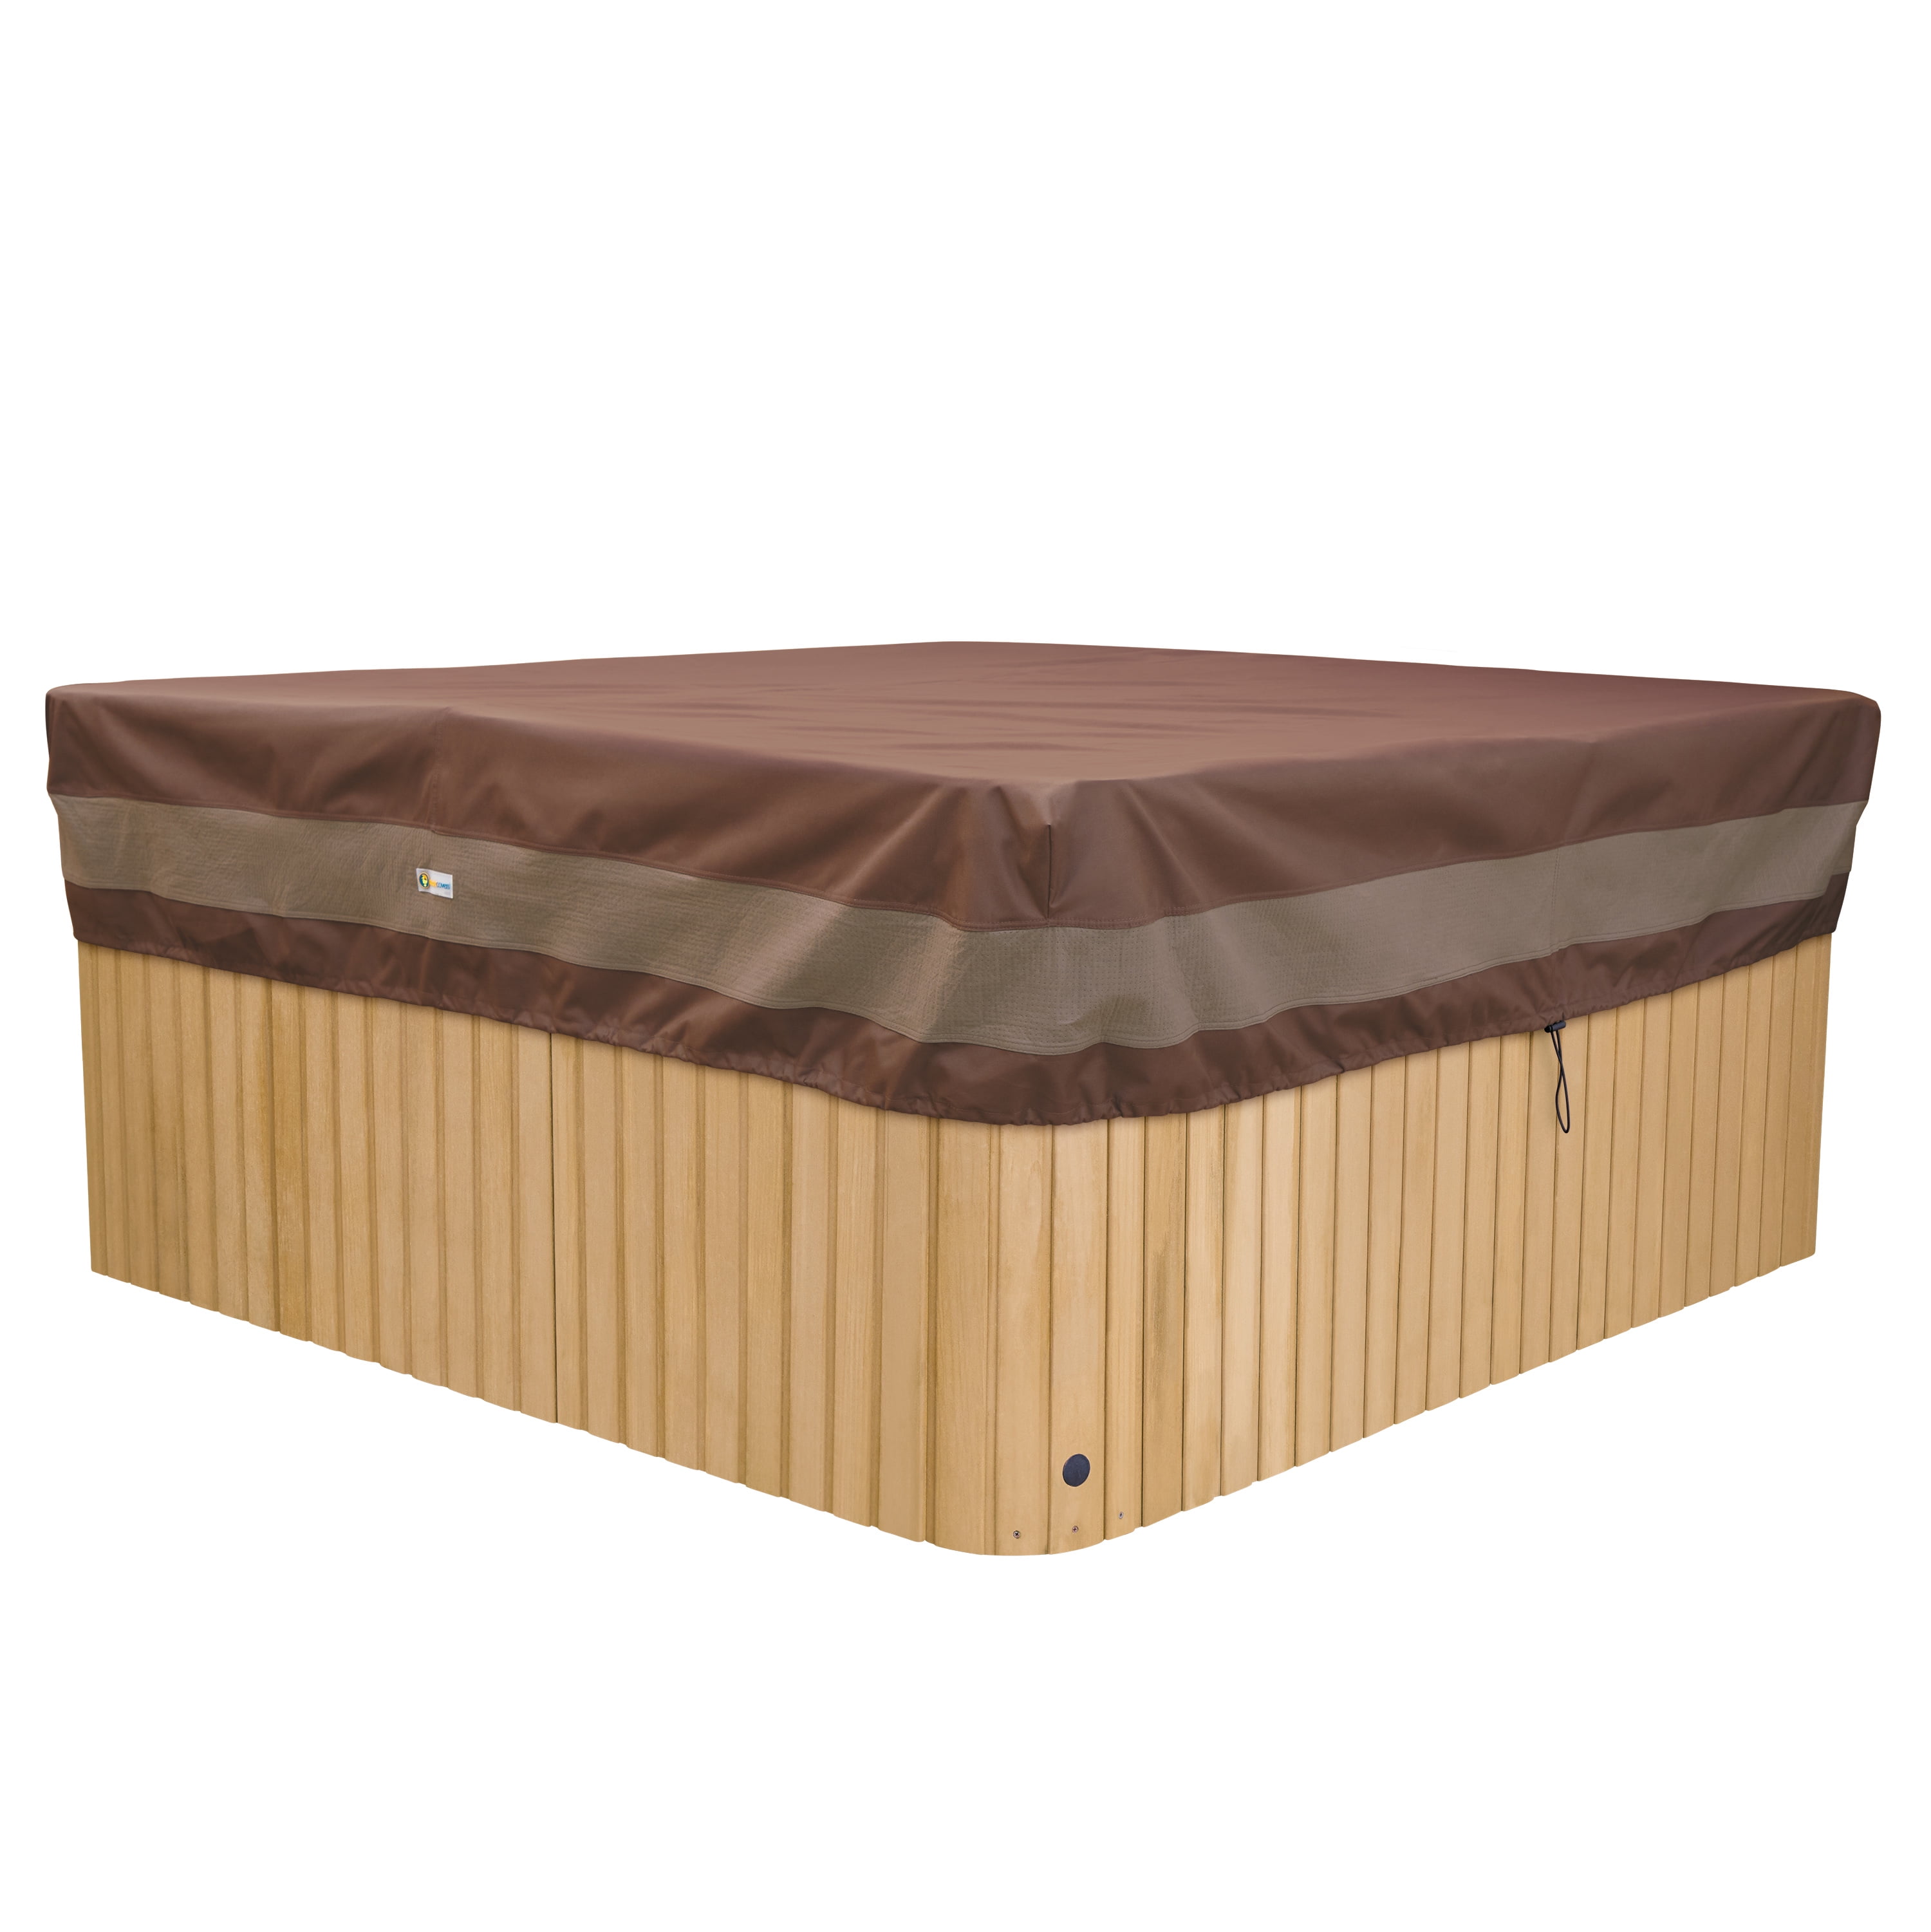 Tan for sale online 14 H x 86 W x 86 L Budge All-Seasons Square Hot Tub Cover P9A16SF1 